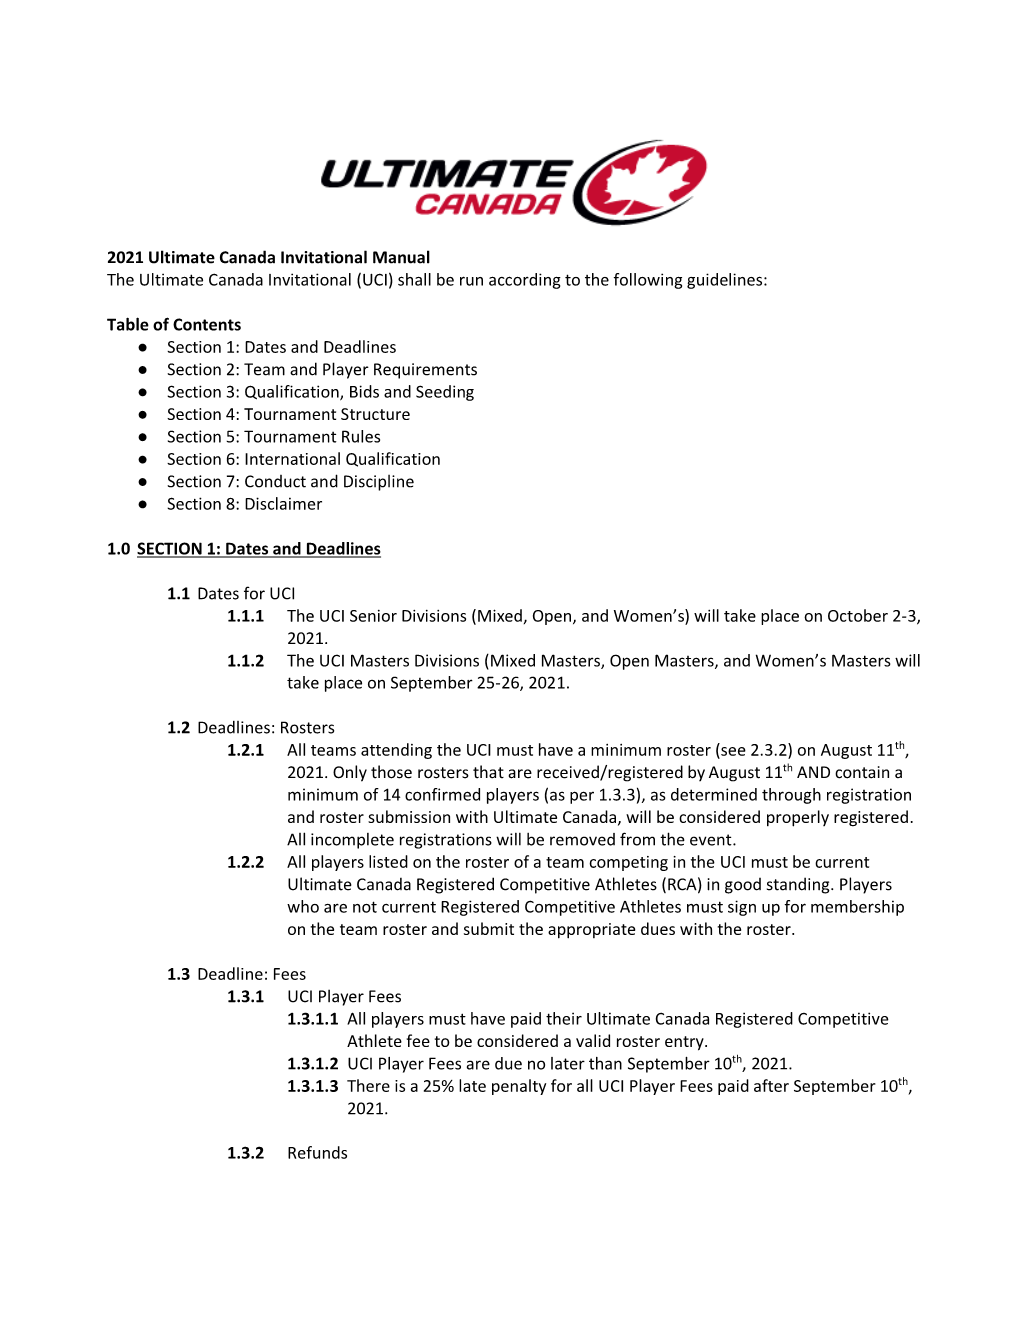 2021 Ultimate Canada Invitational Manual the Ultimate Canada Invitational (UCI) Shall Be Run According to the Following Guidelines